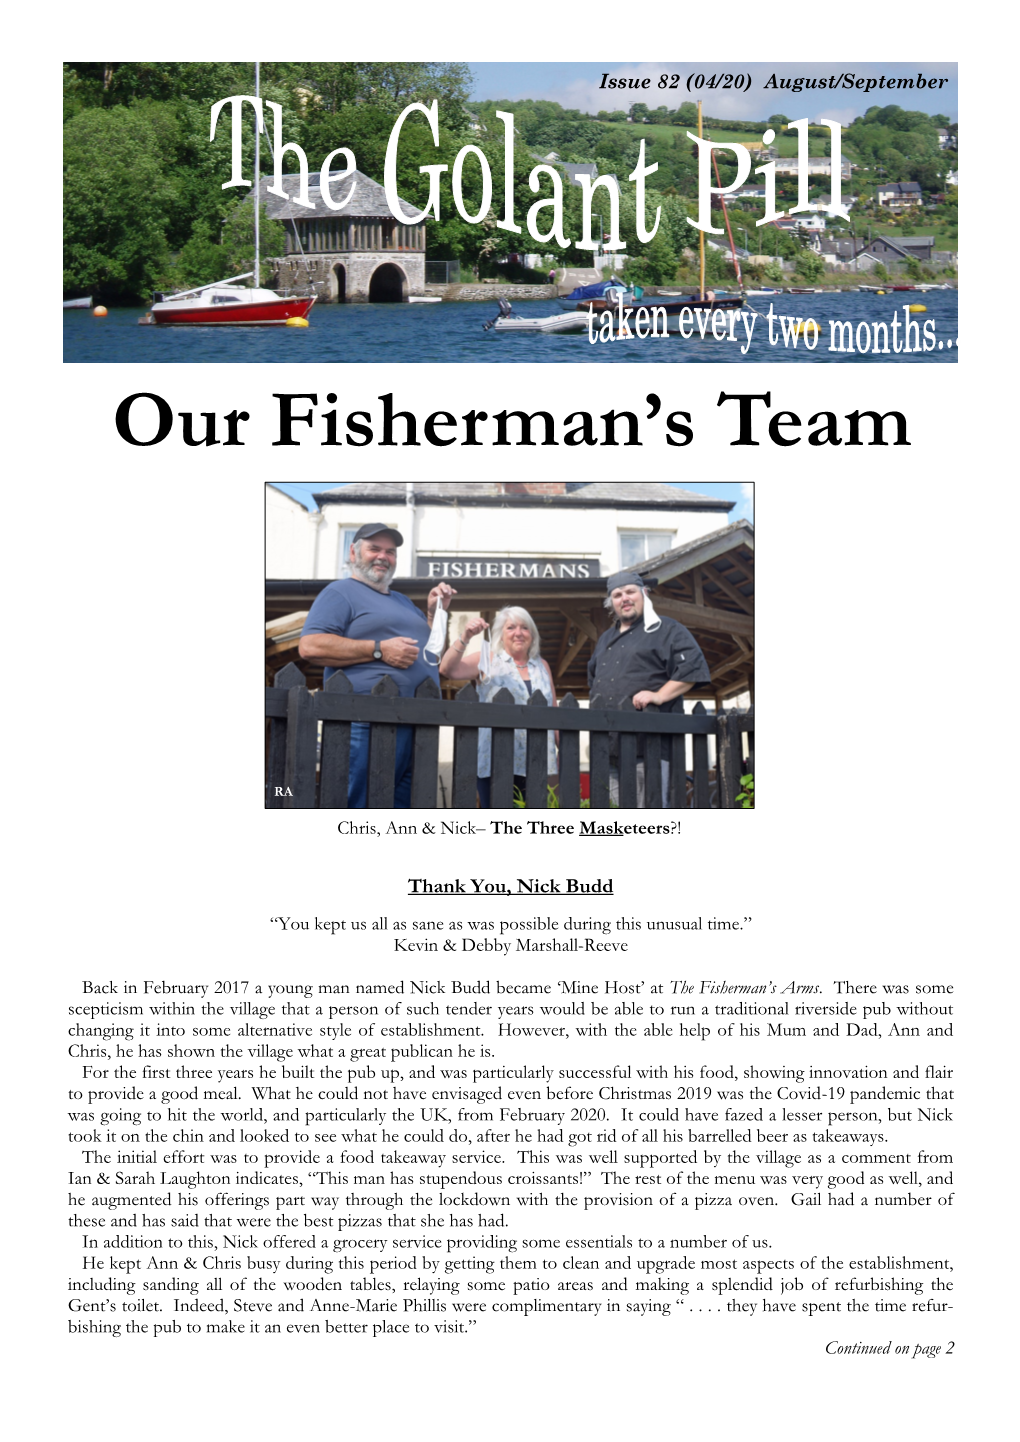 Our Fisherman's Team